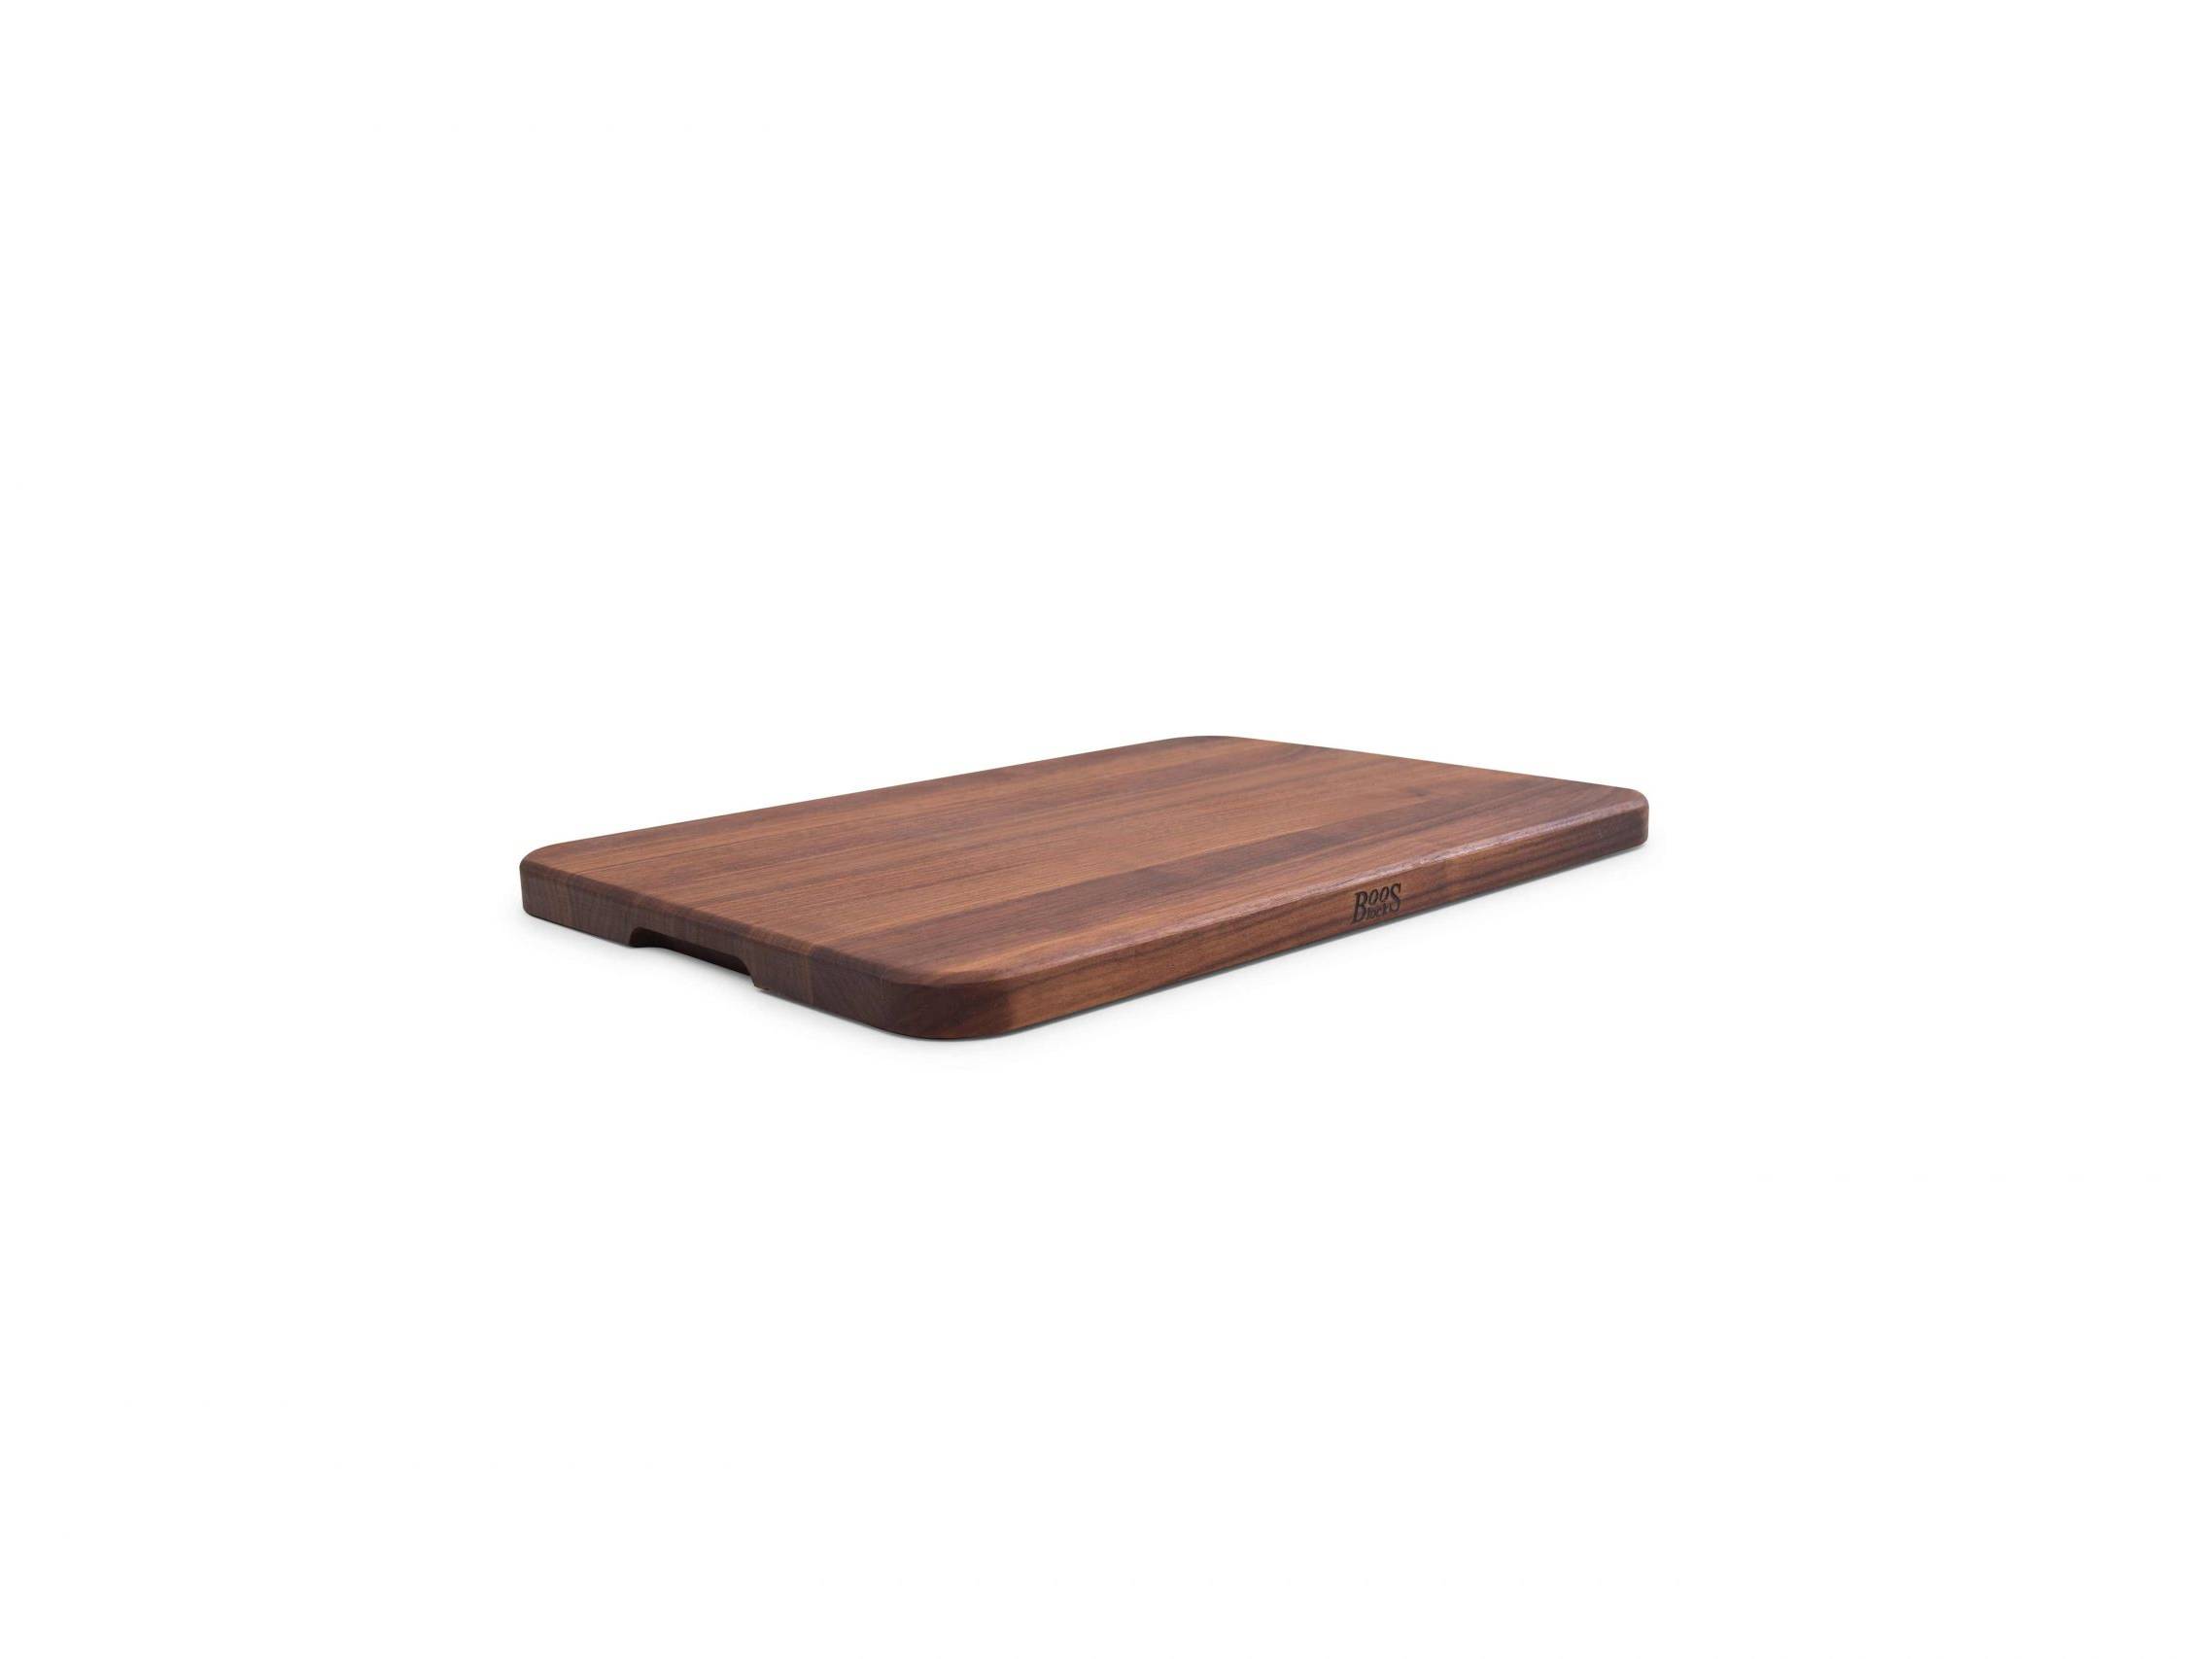 Chop-N-Serve Black Walnut chopping board with recessed grip; can be used on both sides 17